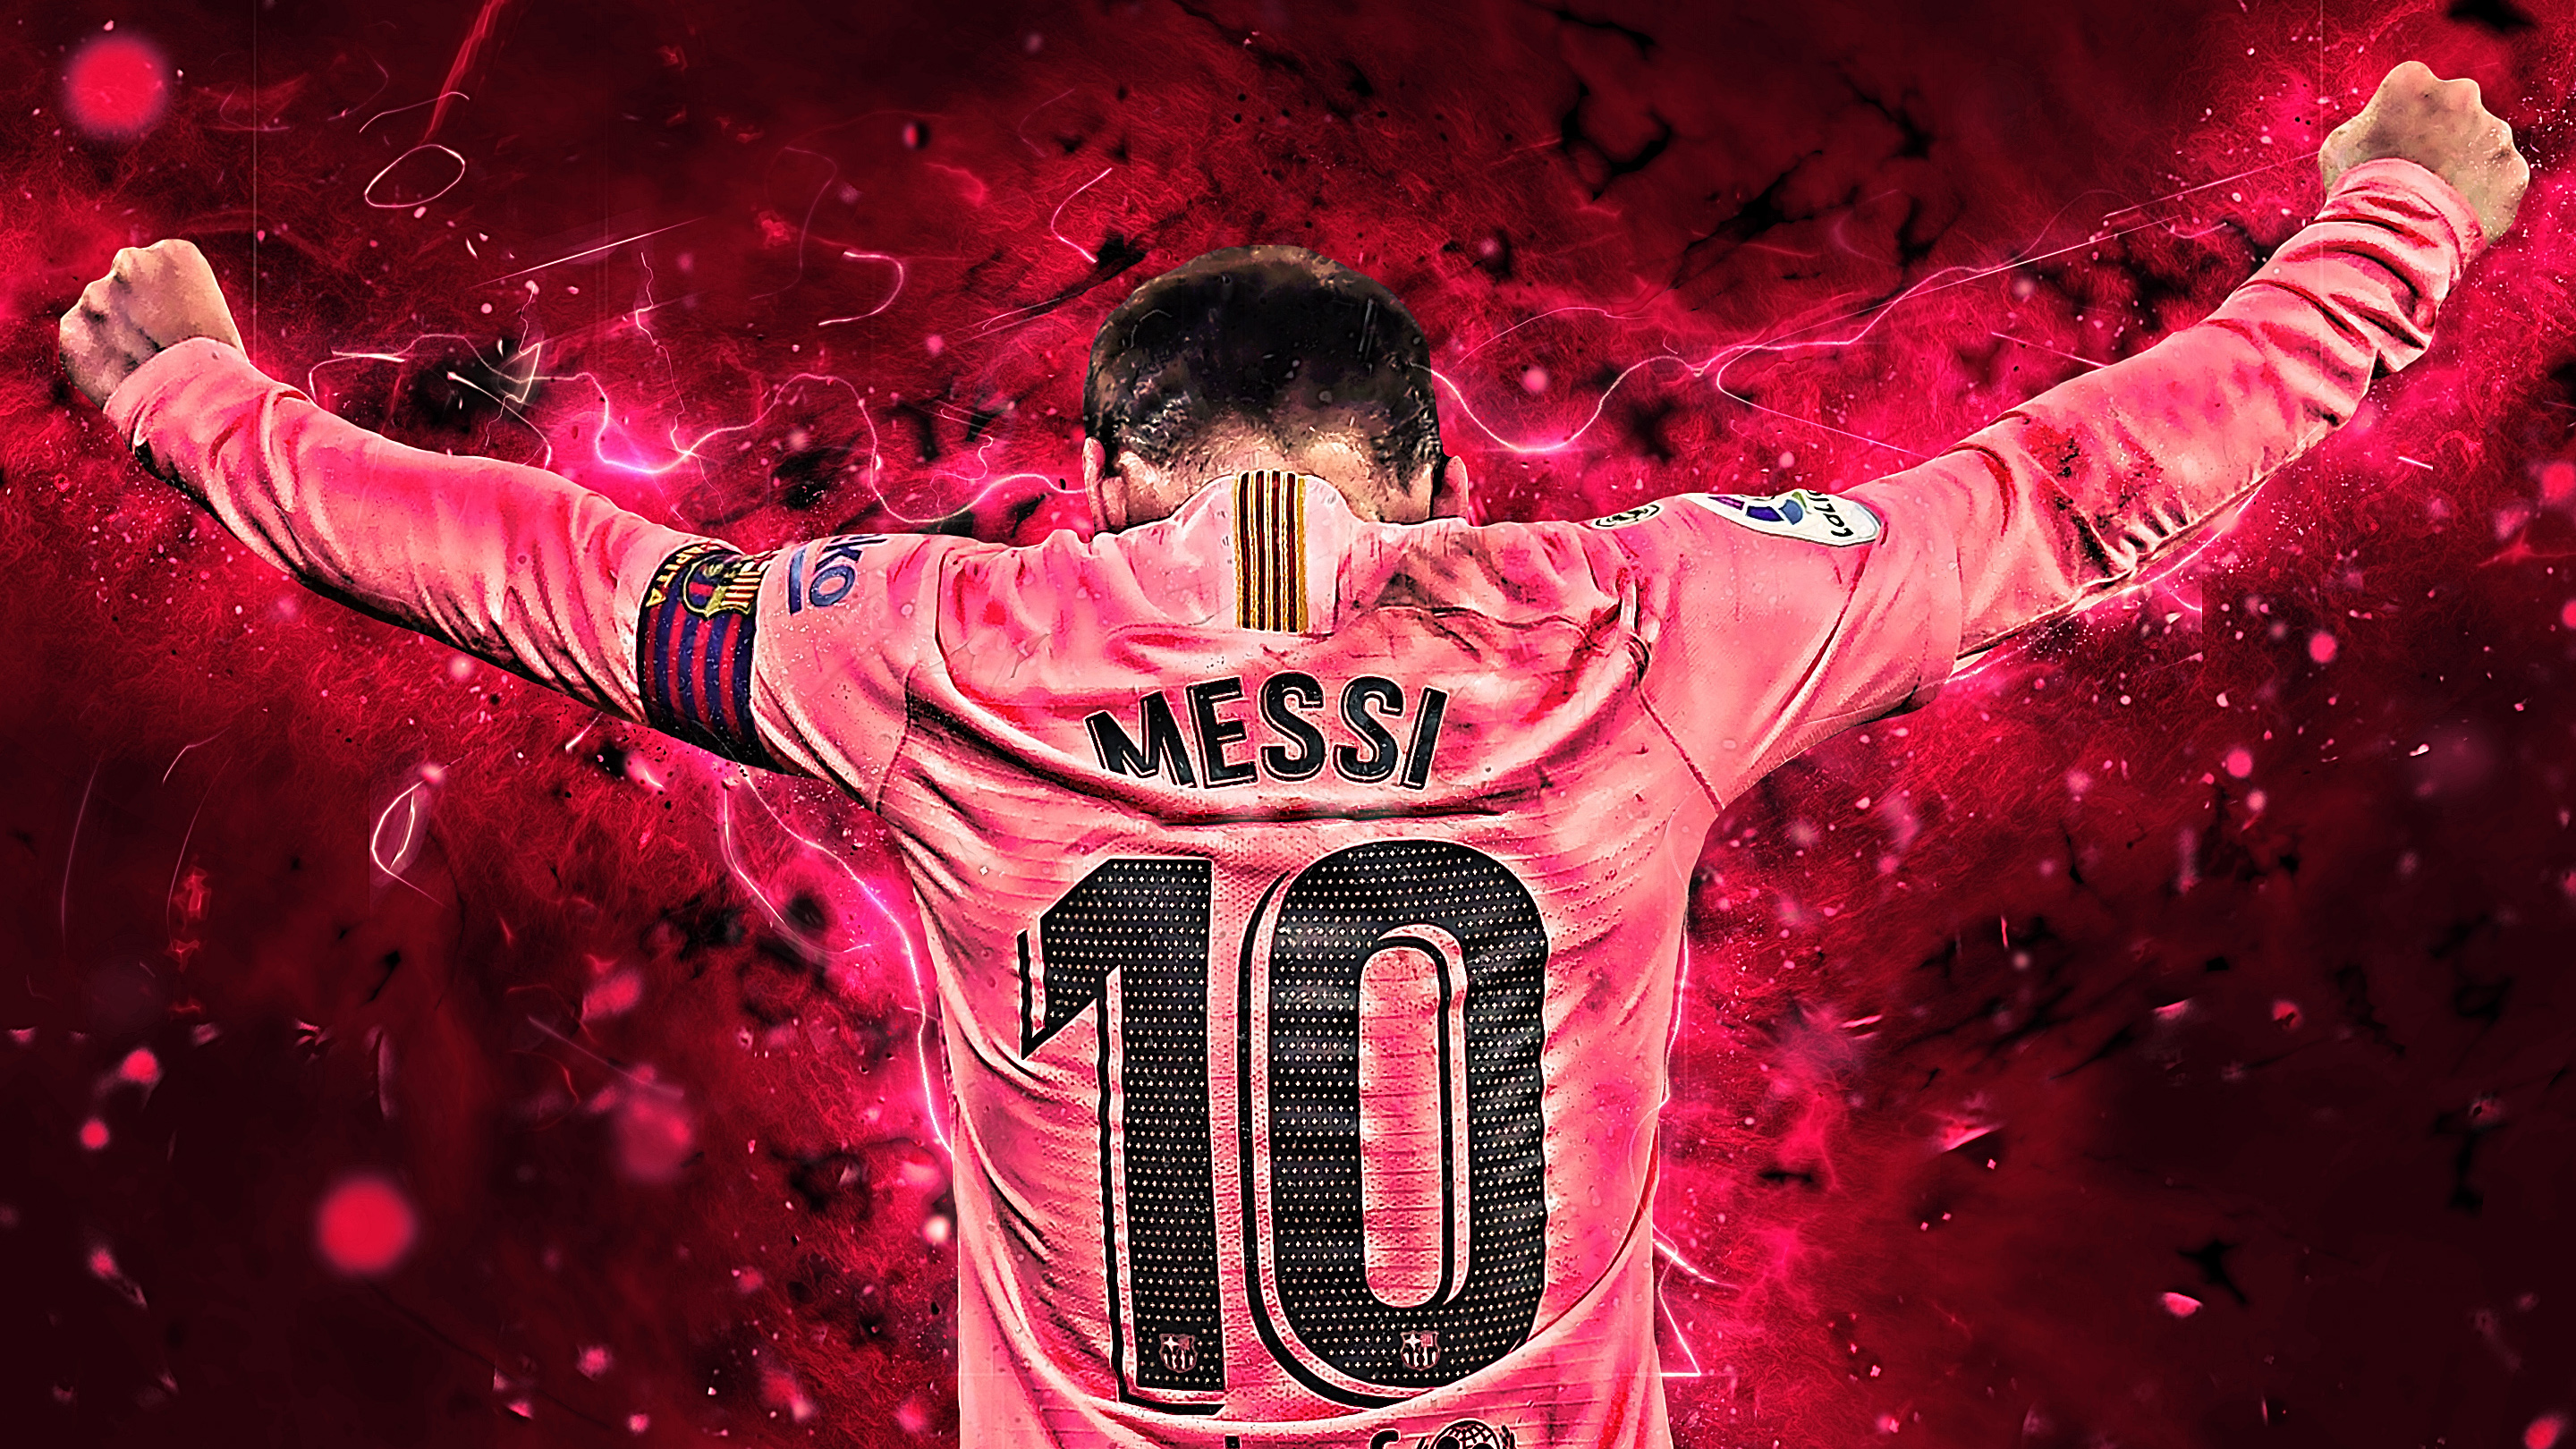 Free Download Lionel Messi 2019 Wallpapers Hd Wallpapers 2880x1620 For Your Desktop Mobile Tablet Explore 25 Leo Messi 2019 Wallpapers Leo Messi 2019 Wallpapers Leo Messi Wallpaper Leo Messi Wallpaper 2016